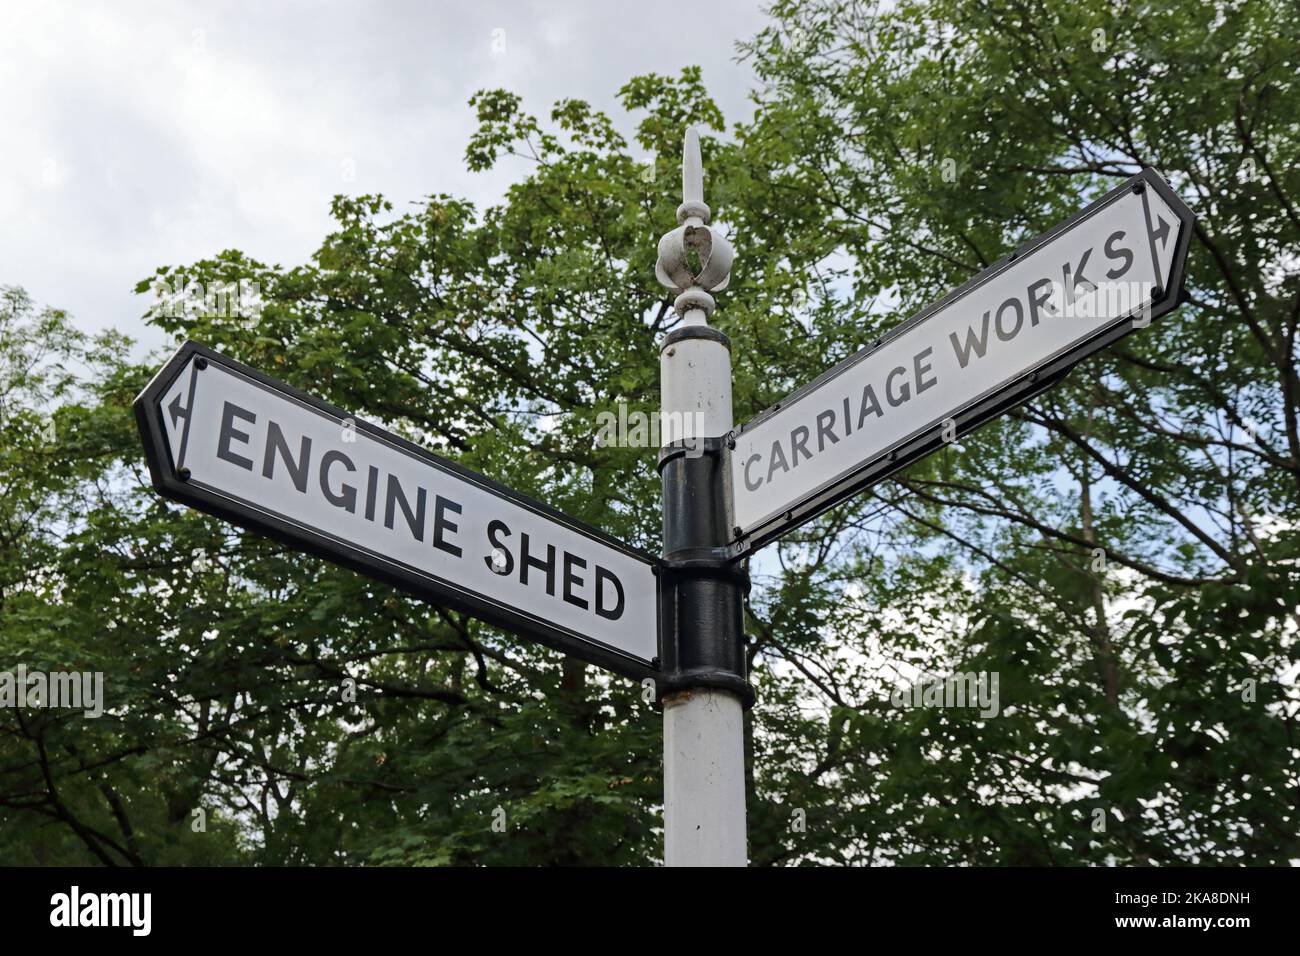 Signpost showing direction of Engine Shed and Carriage Works, Ingrow West railway station on Keighley & Worth Valley Railway Stock Photo